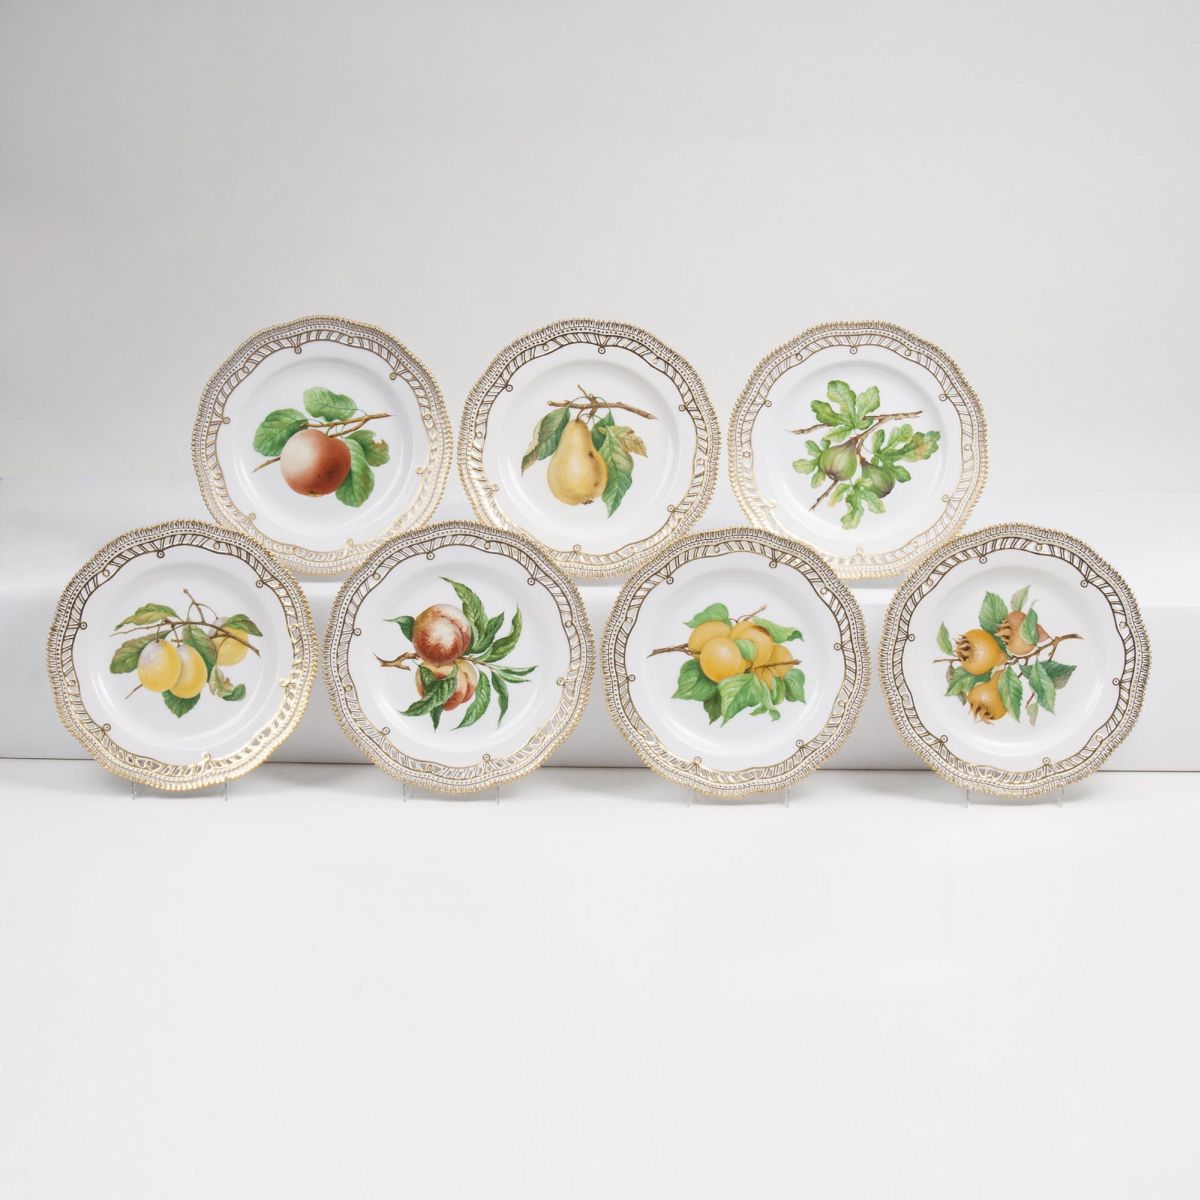 A Set of 7 reticulated Flora Danica Plates with Fruits